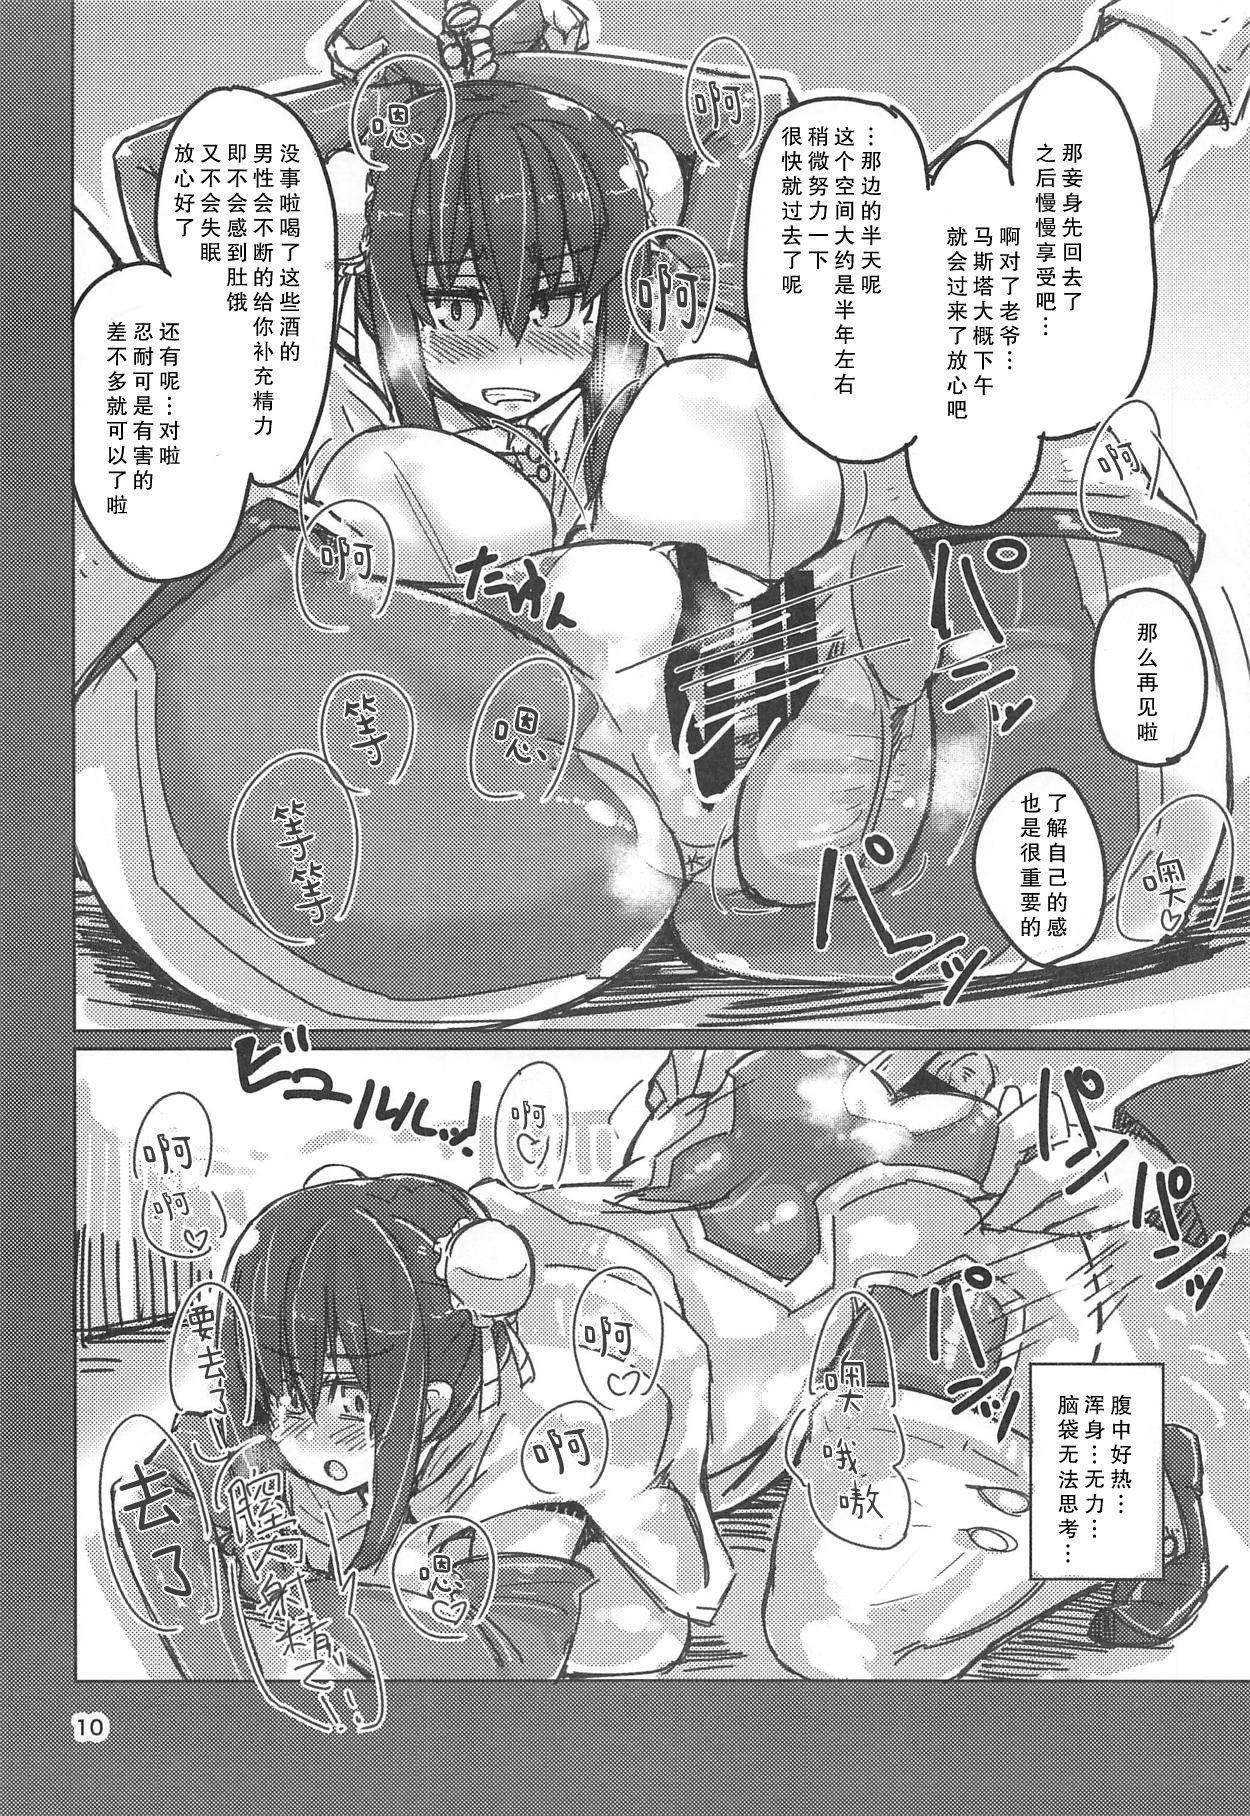 Creampies SHS - Fate grand order Abuse - Page 10